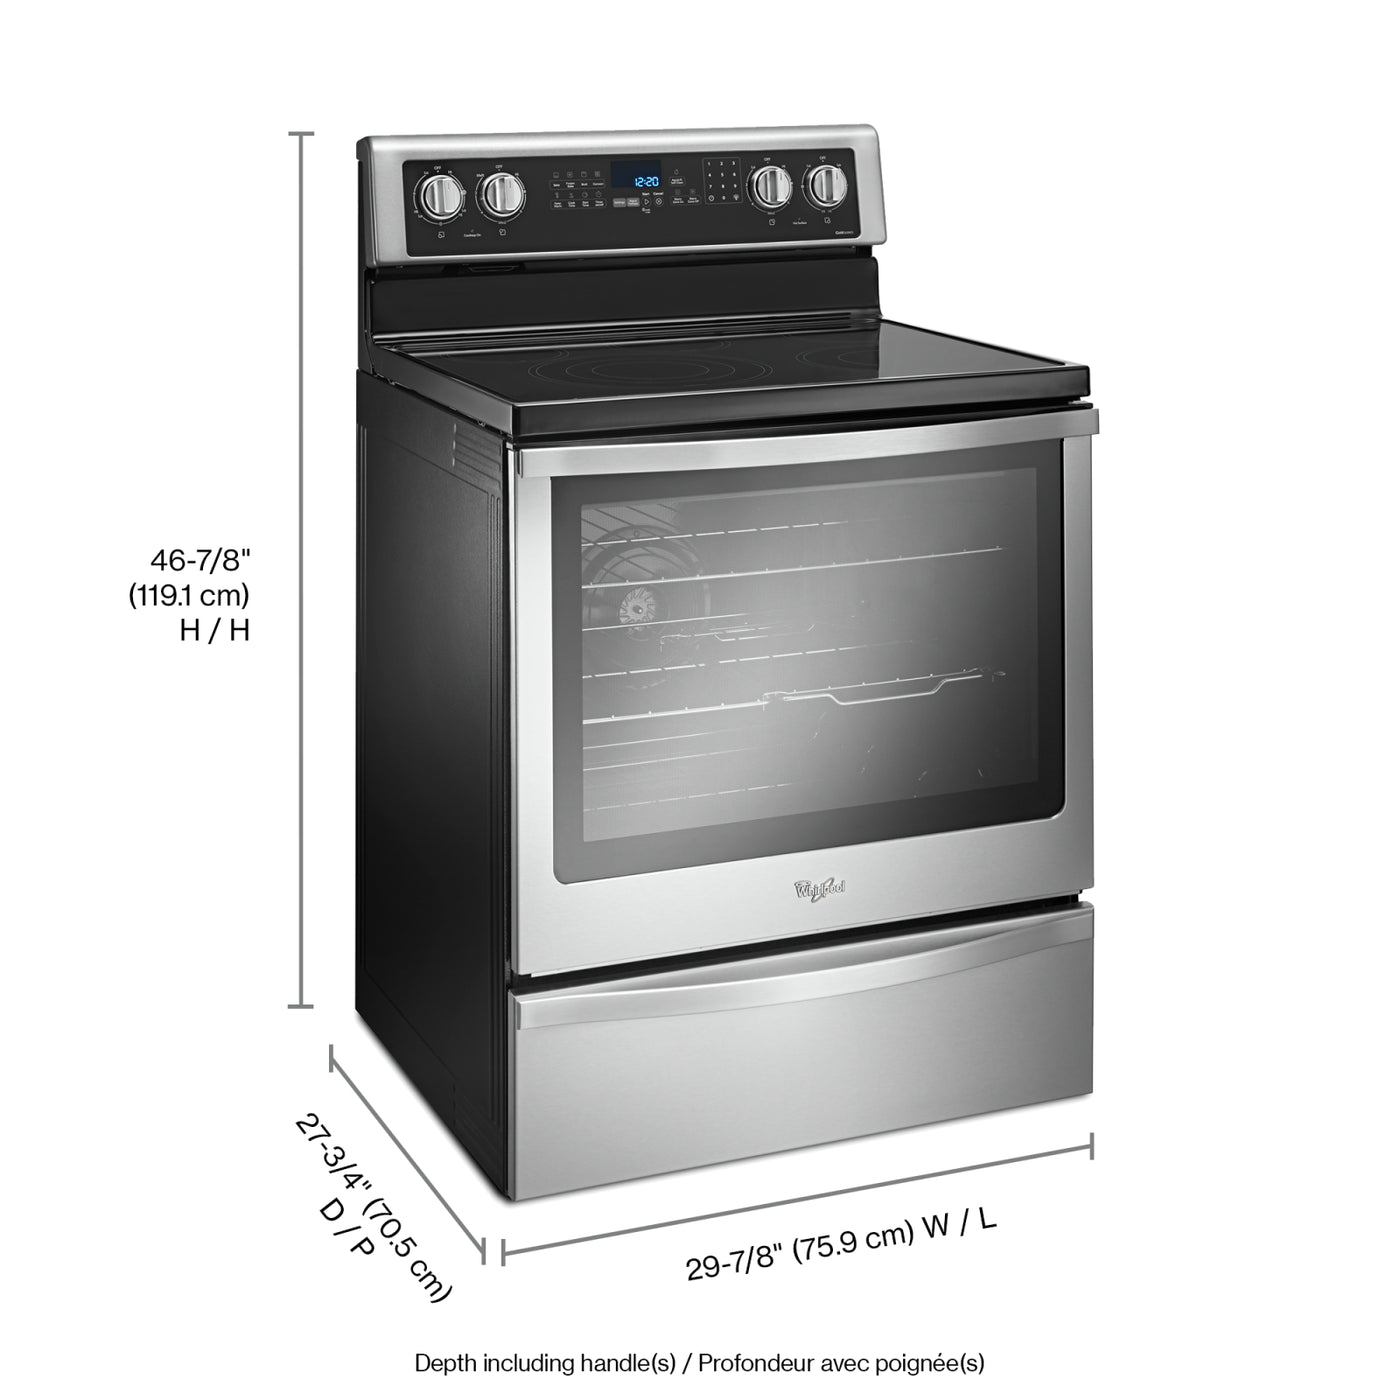 Whirlpool Stainless Steel Free-Standing Electric Range (6.4 Cu.Ft.) - YWFE745H0FS